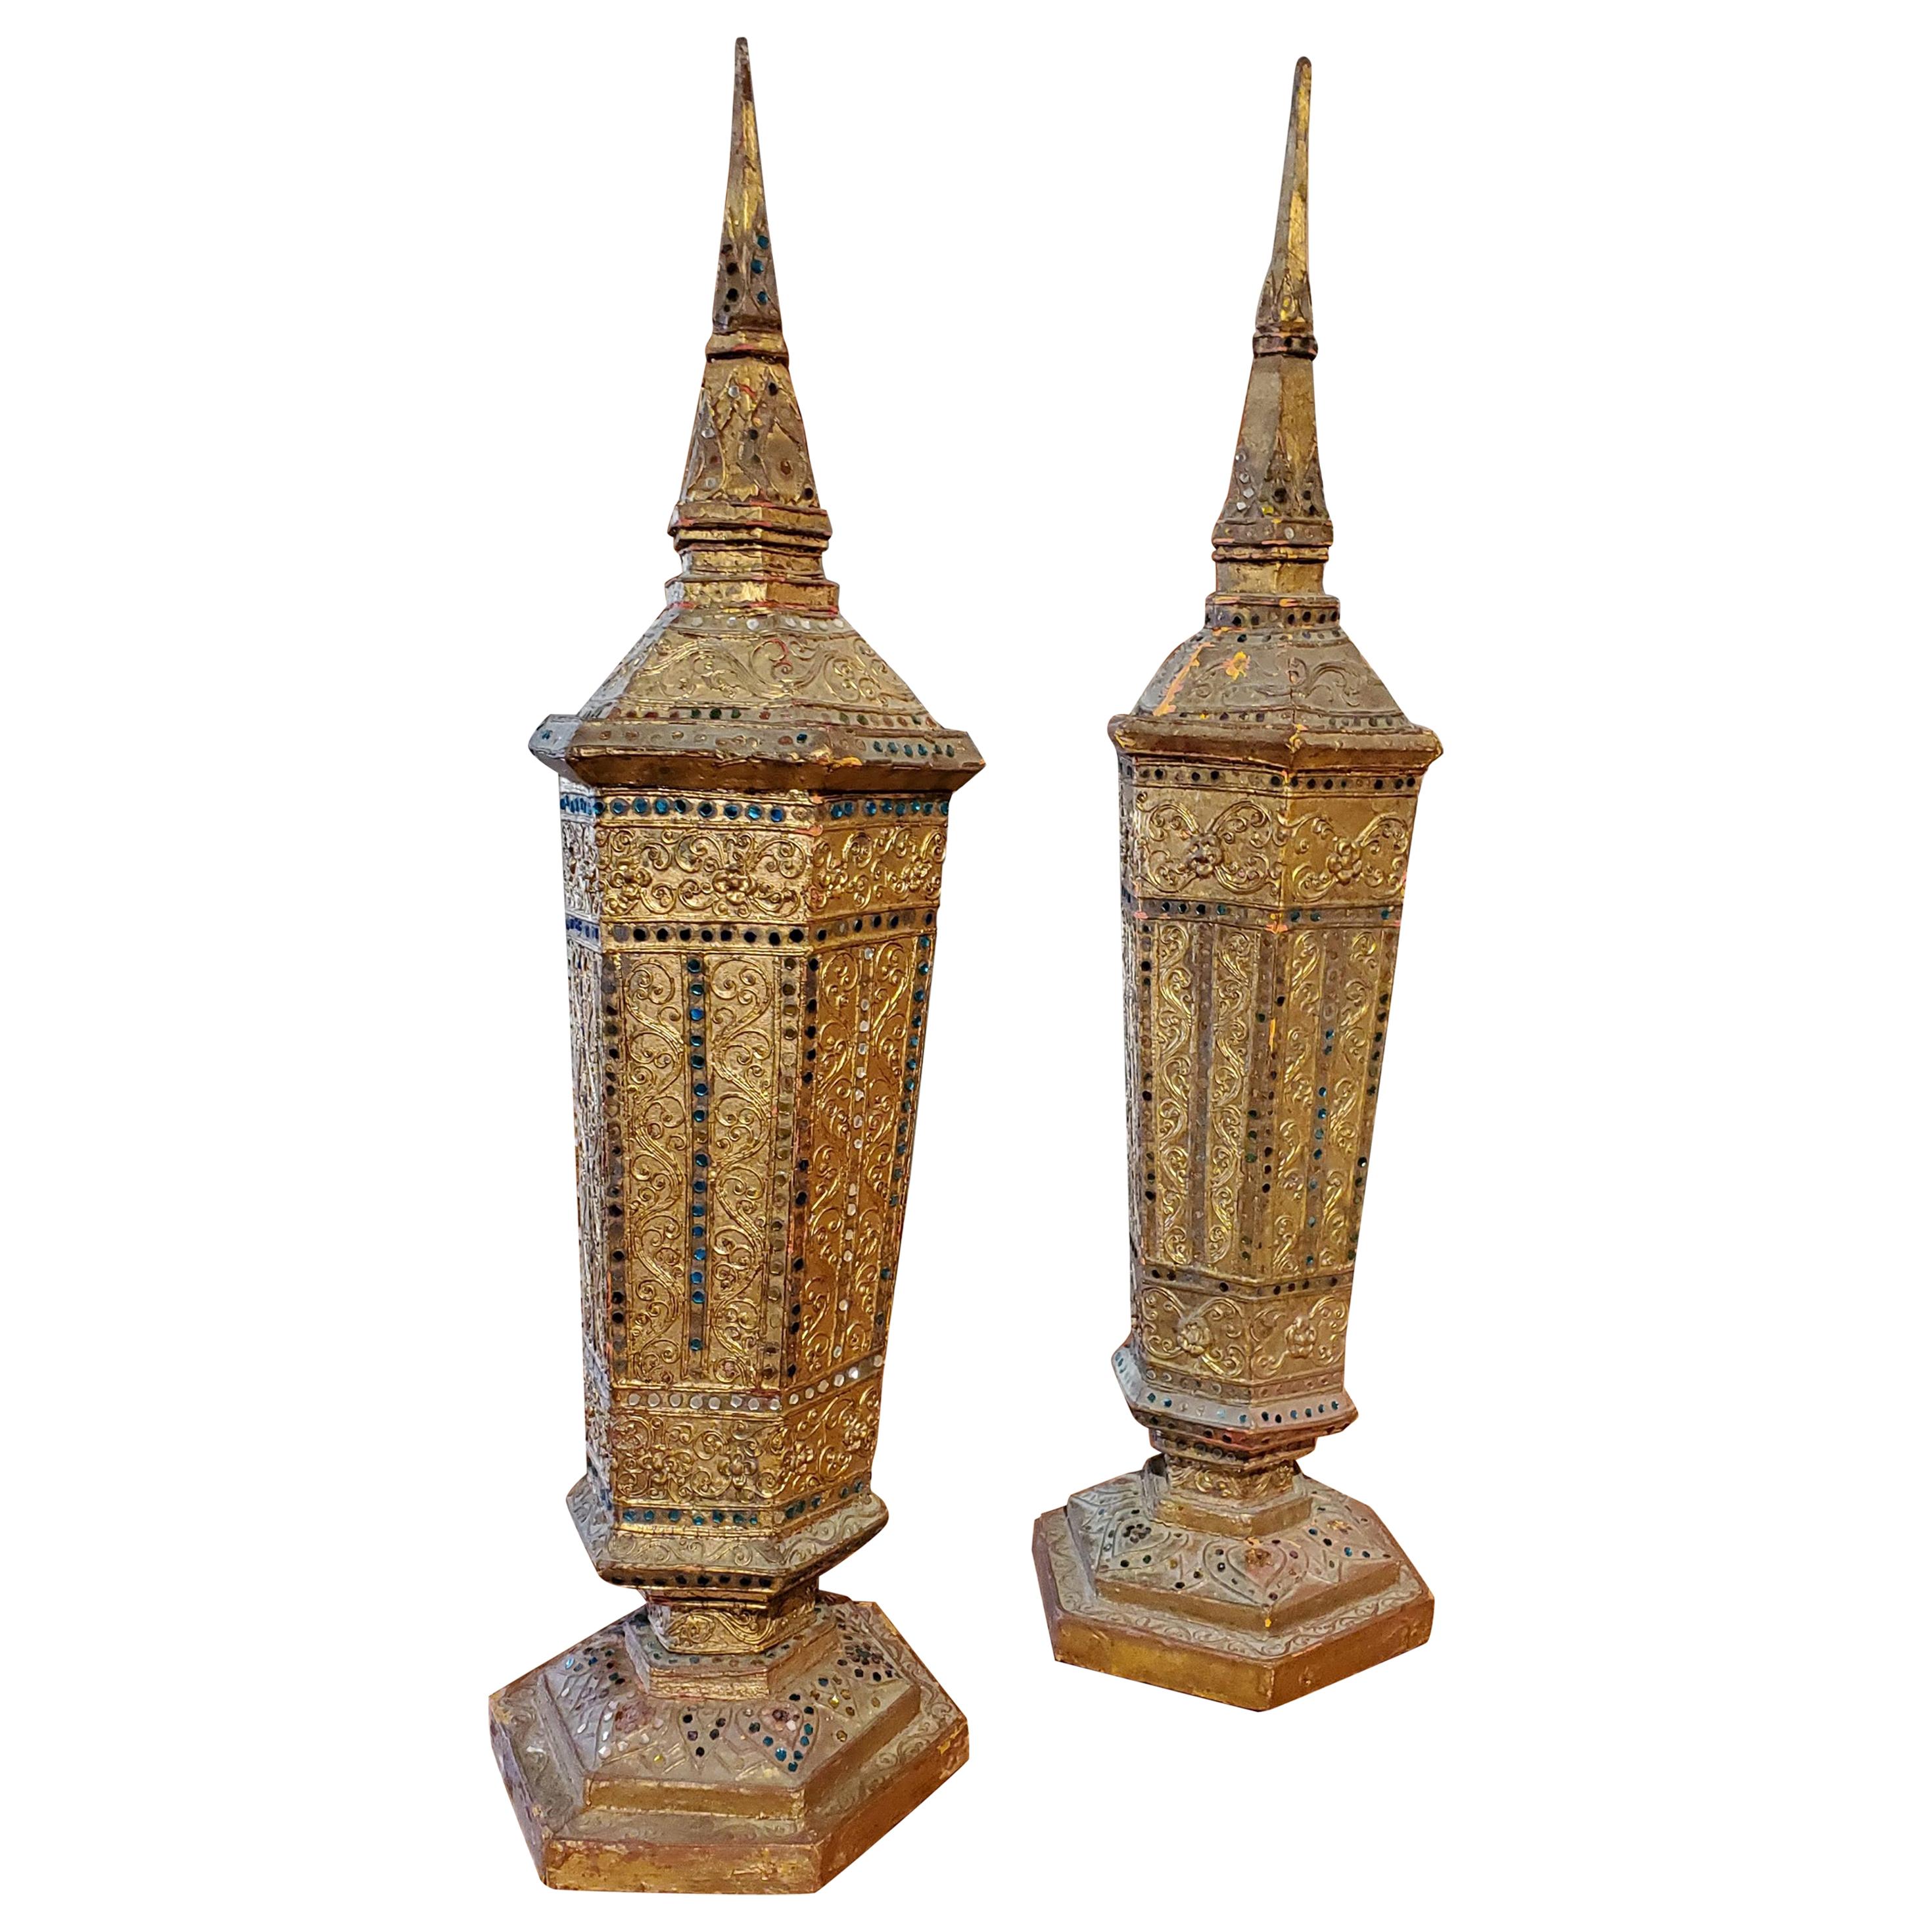 Pair of Late 19th Century Gold Gilt Hexagonal Decorative Thai Urns For Sale